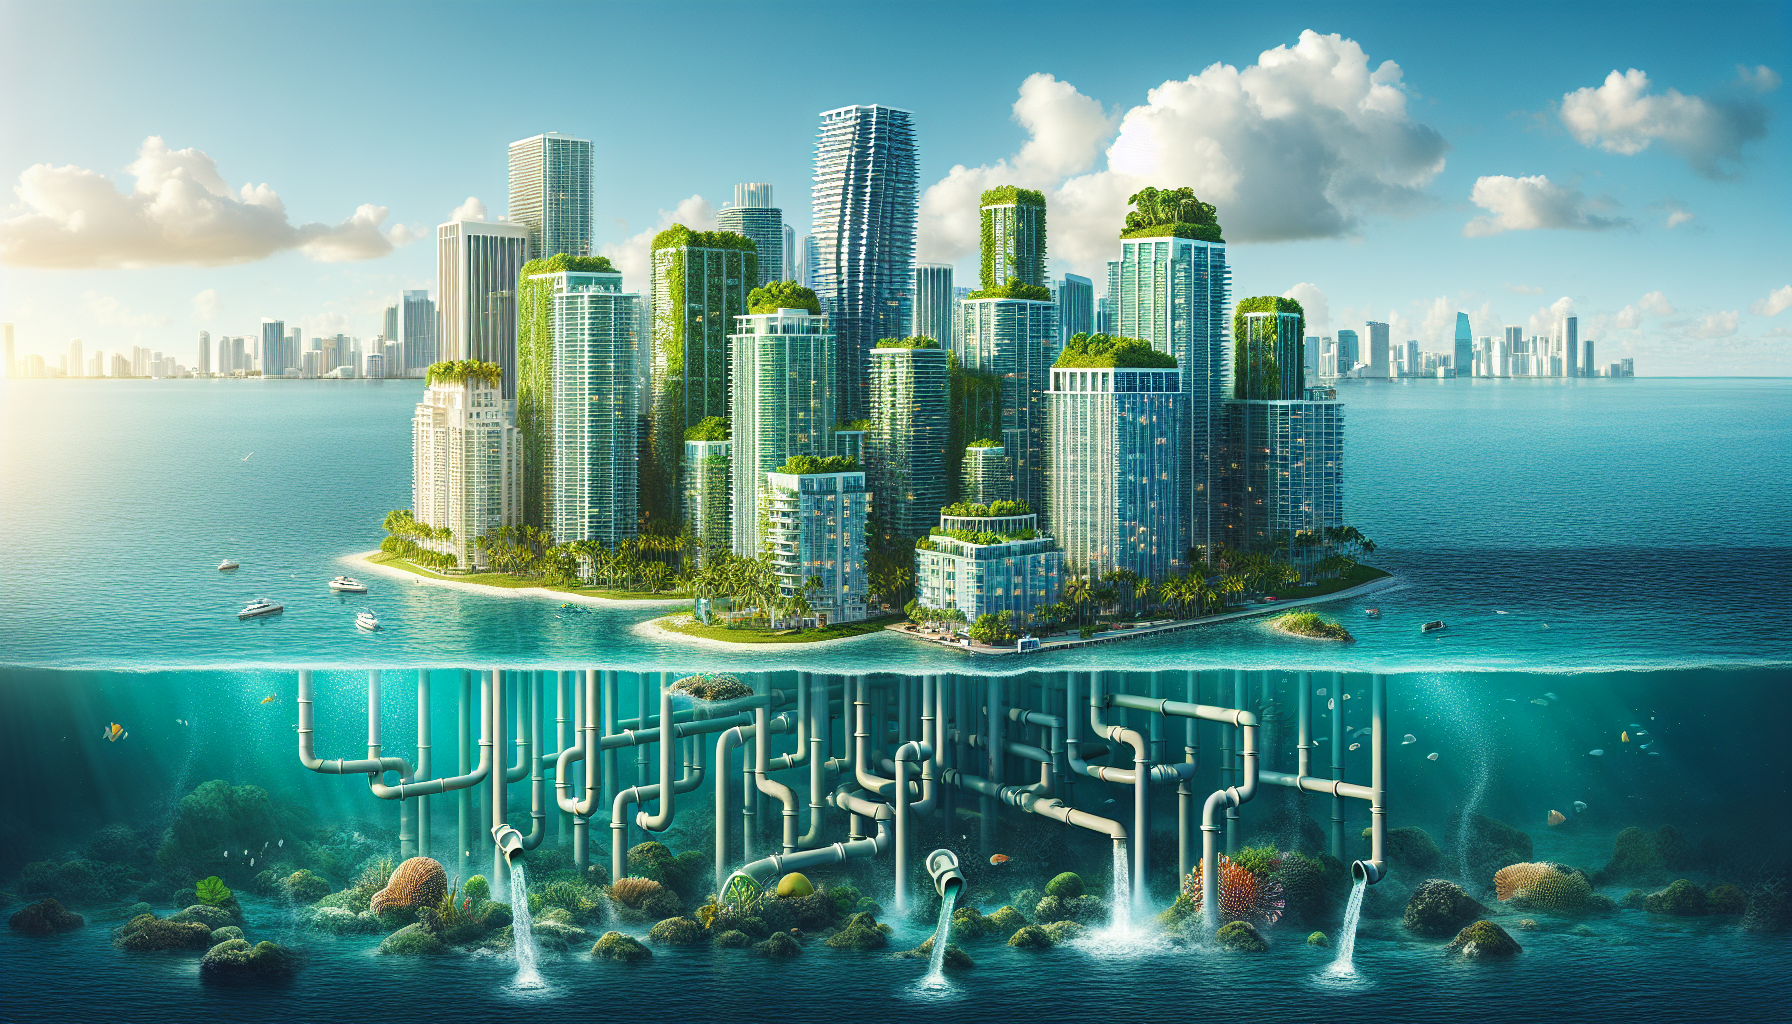 City skyline with environmental conservation concept